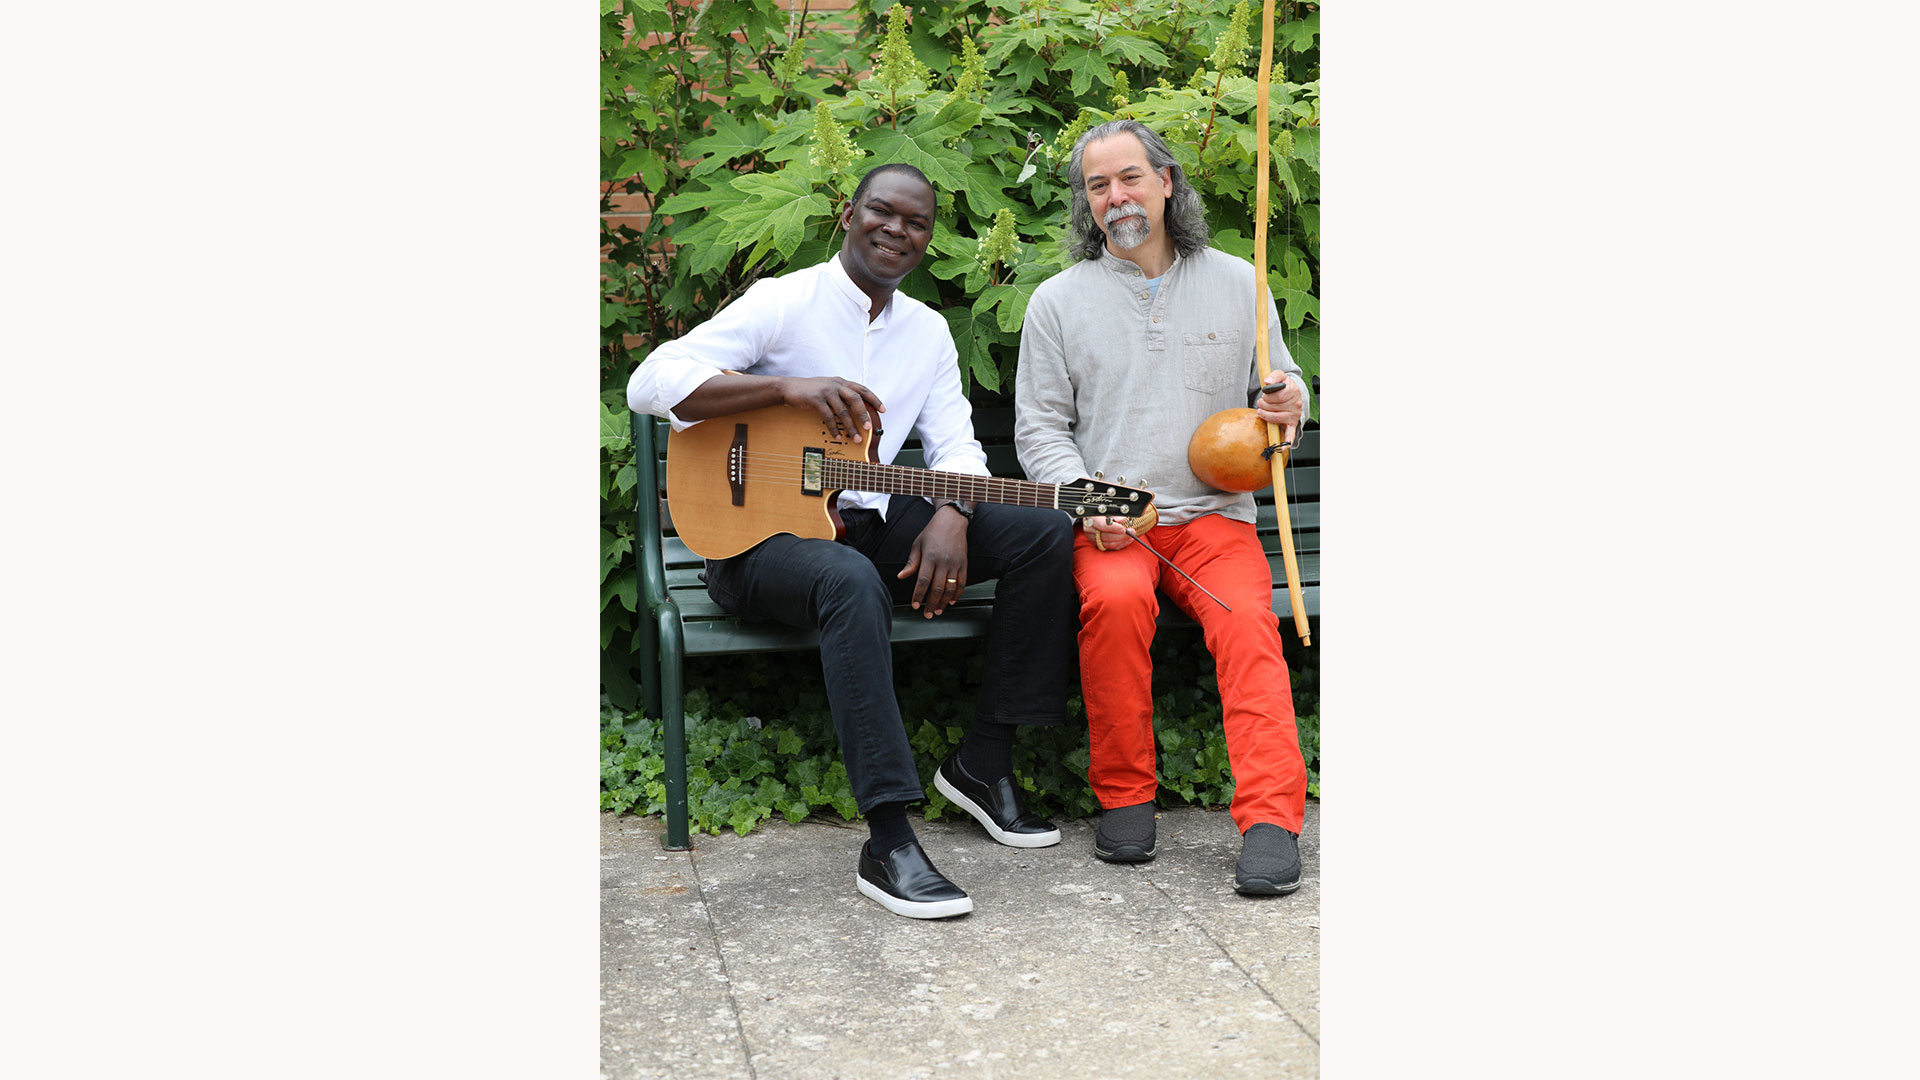 image of Bourema Ouedraogo with a guitar and Jason Finkelman with another instrument sitting next to each other